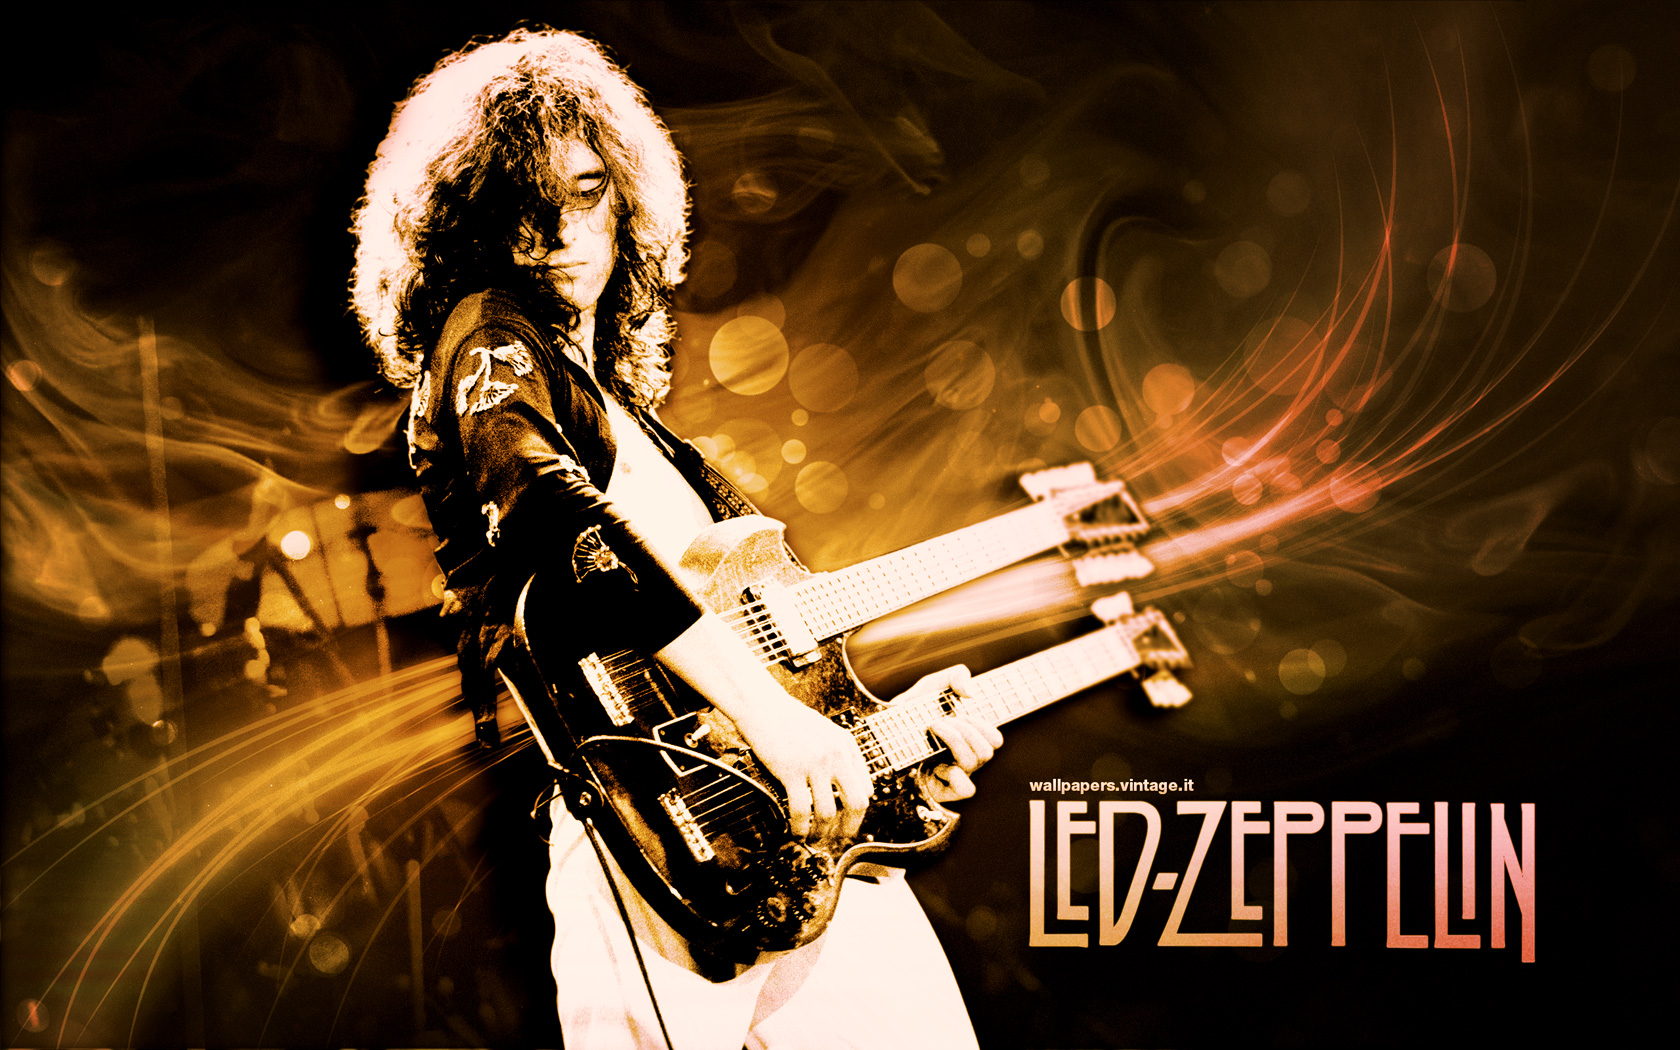 521538 High Resolution Wallpaper led zeppelin  Rare Gallery HD Wallpapers